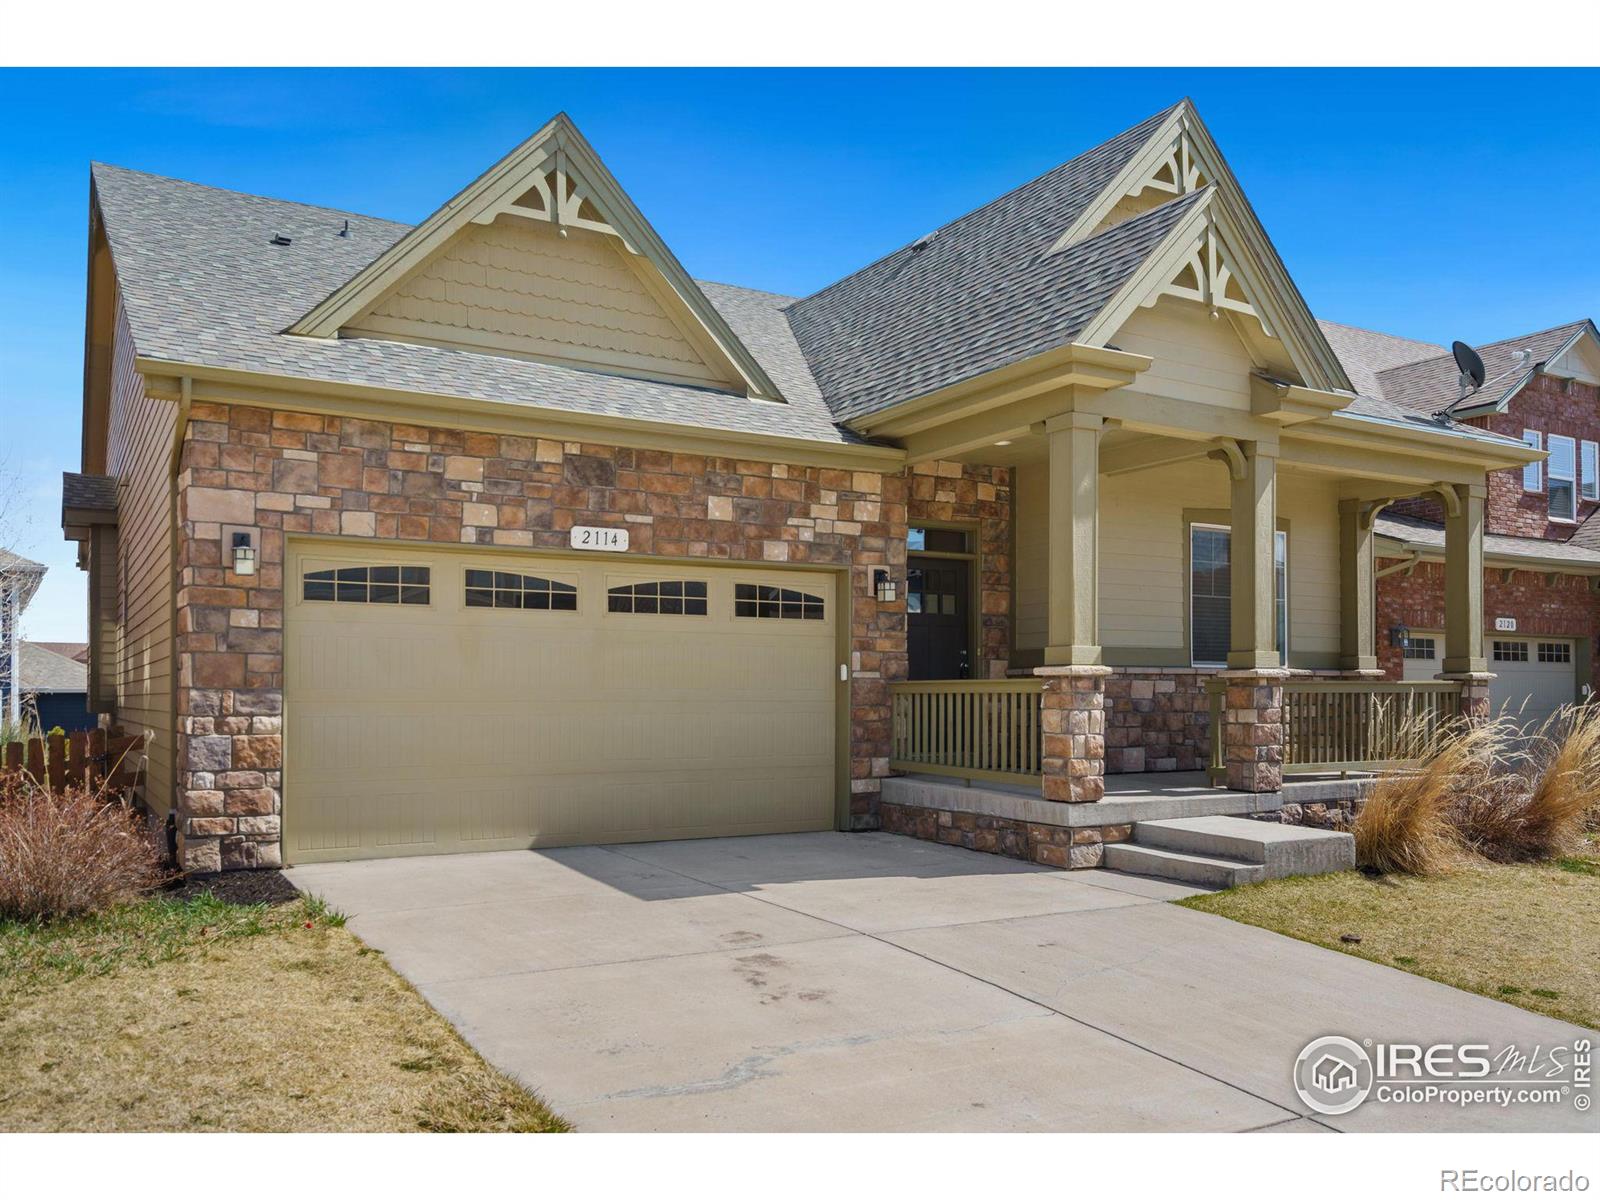 Report Image for 2114  Blue Yonder Way,Fort Collins, Colorado